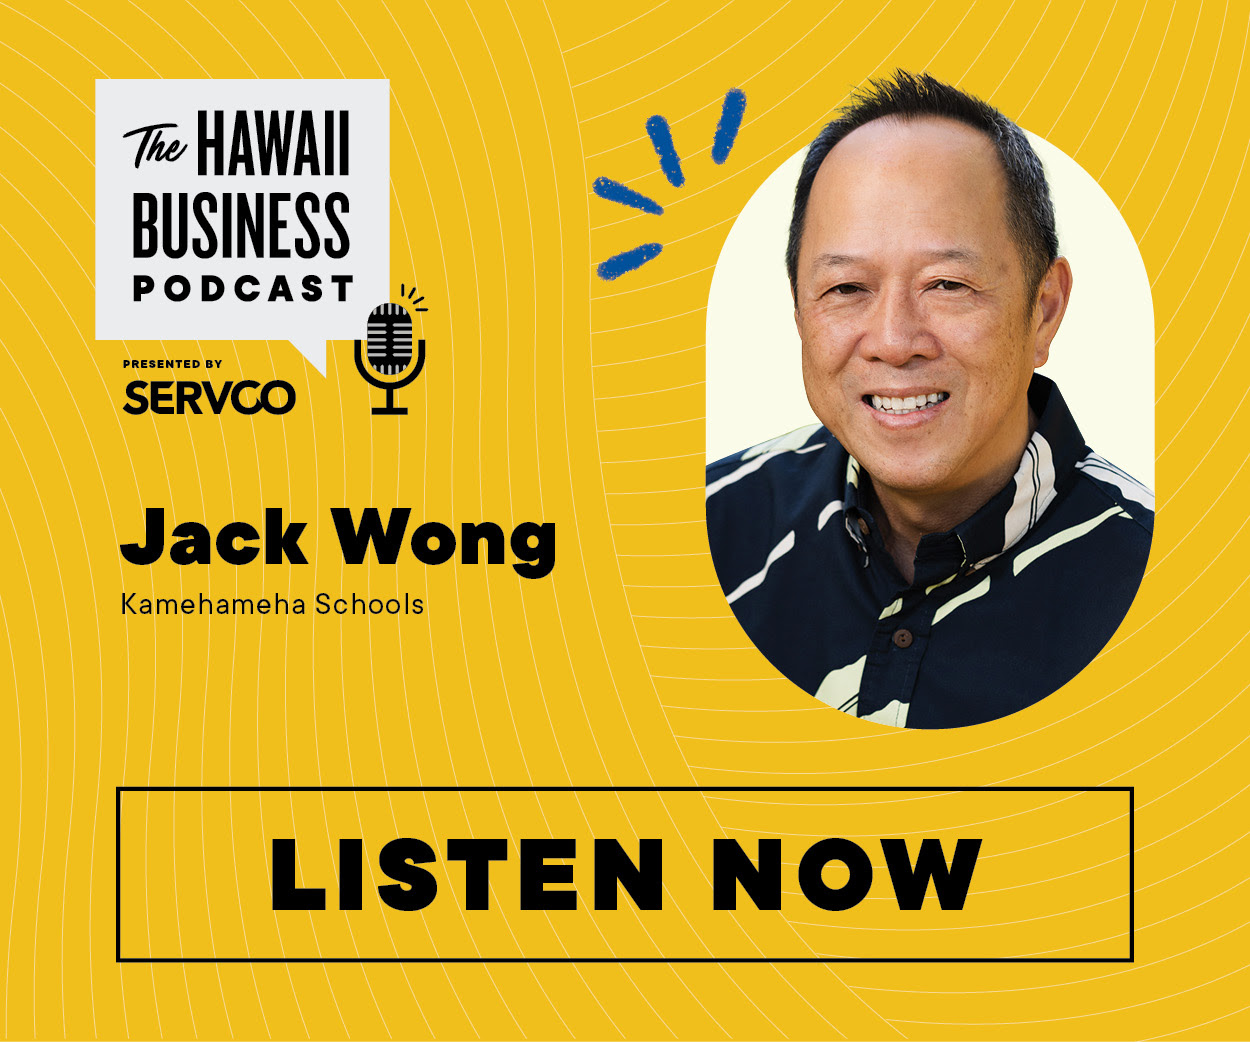 Click here to listen to the this episode of The Hawaii Business Podcast featuring Jack Wong of Kamehameha Schools!